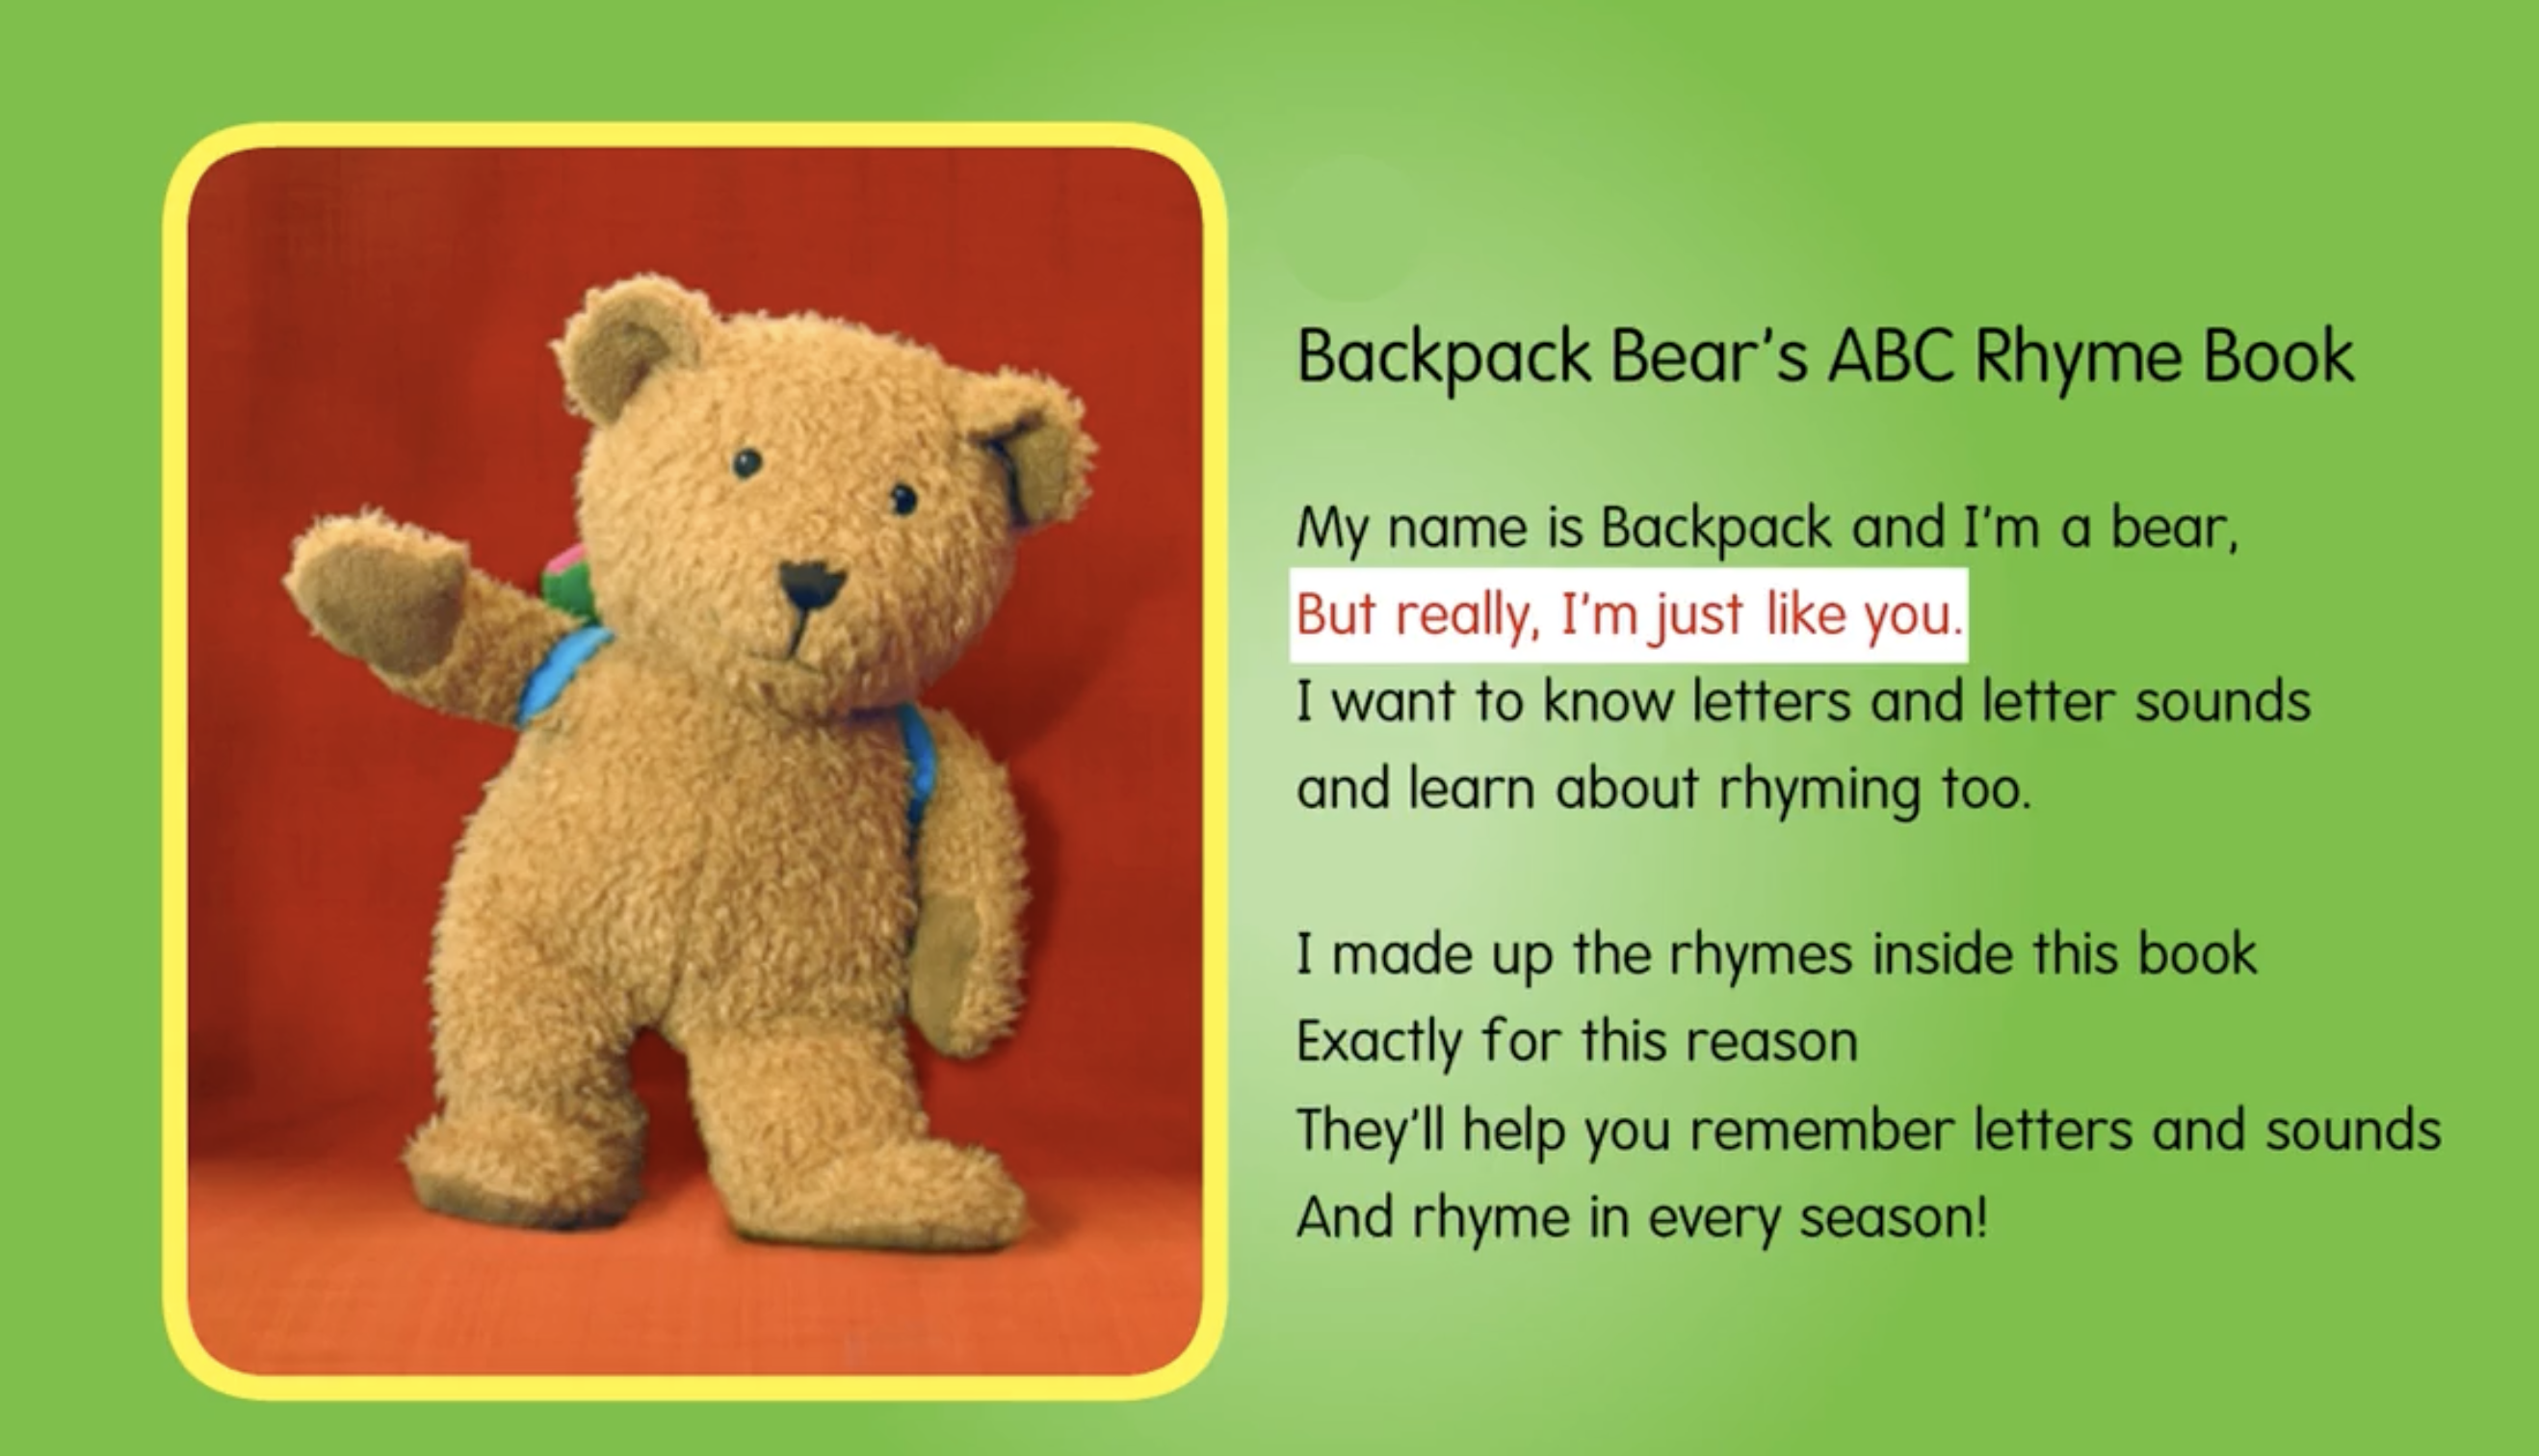 Poem about Backpack Bear